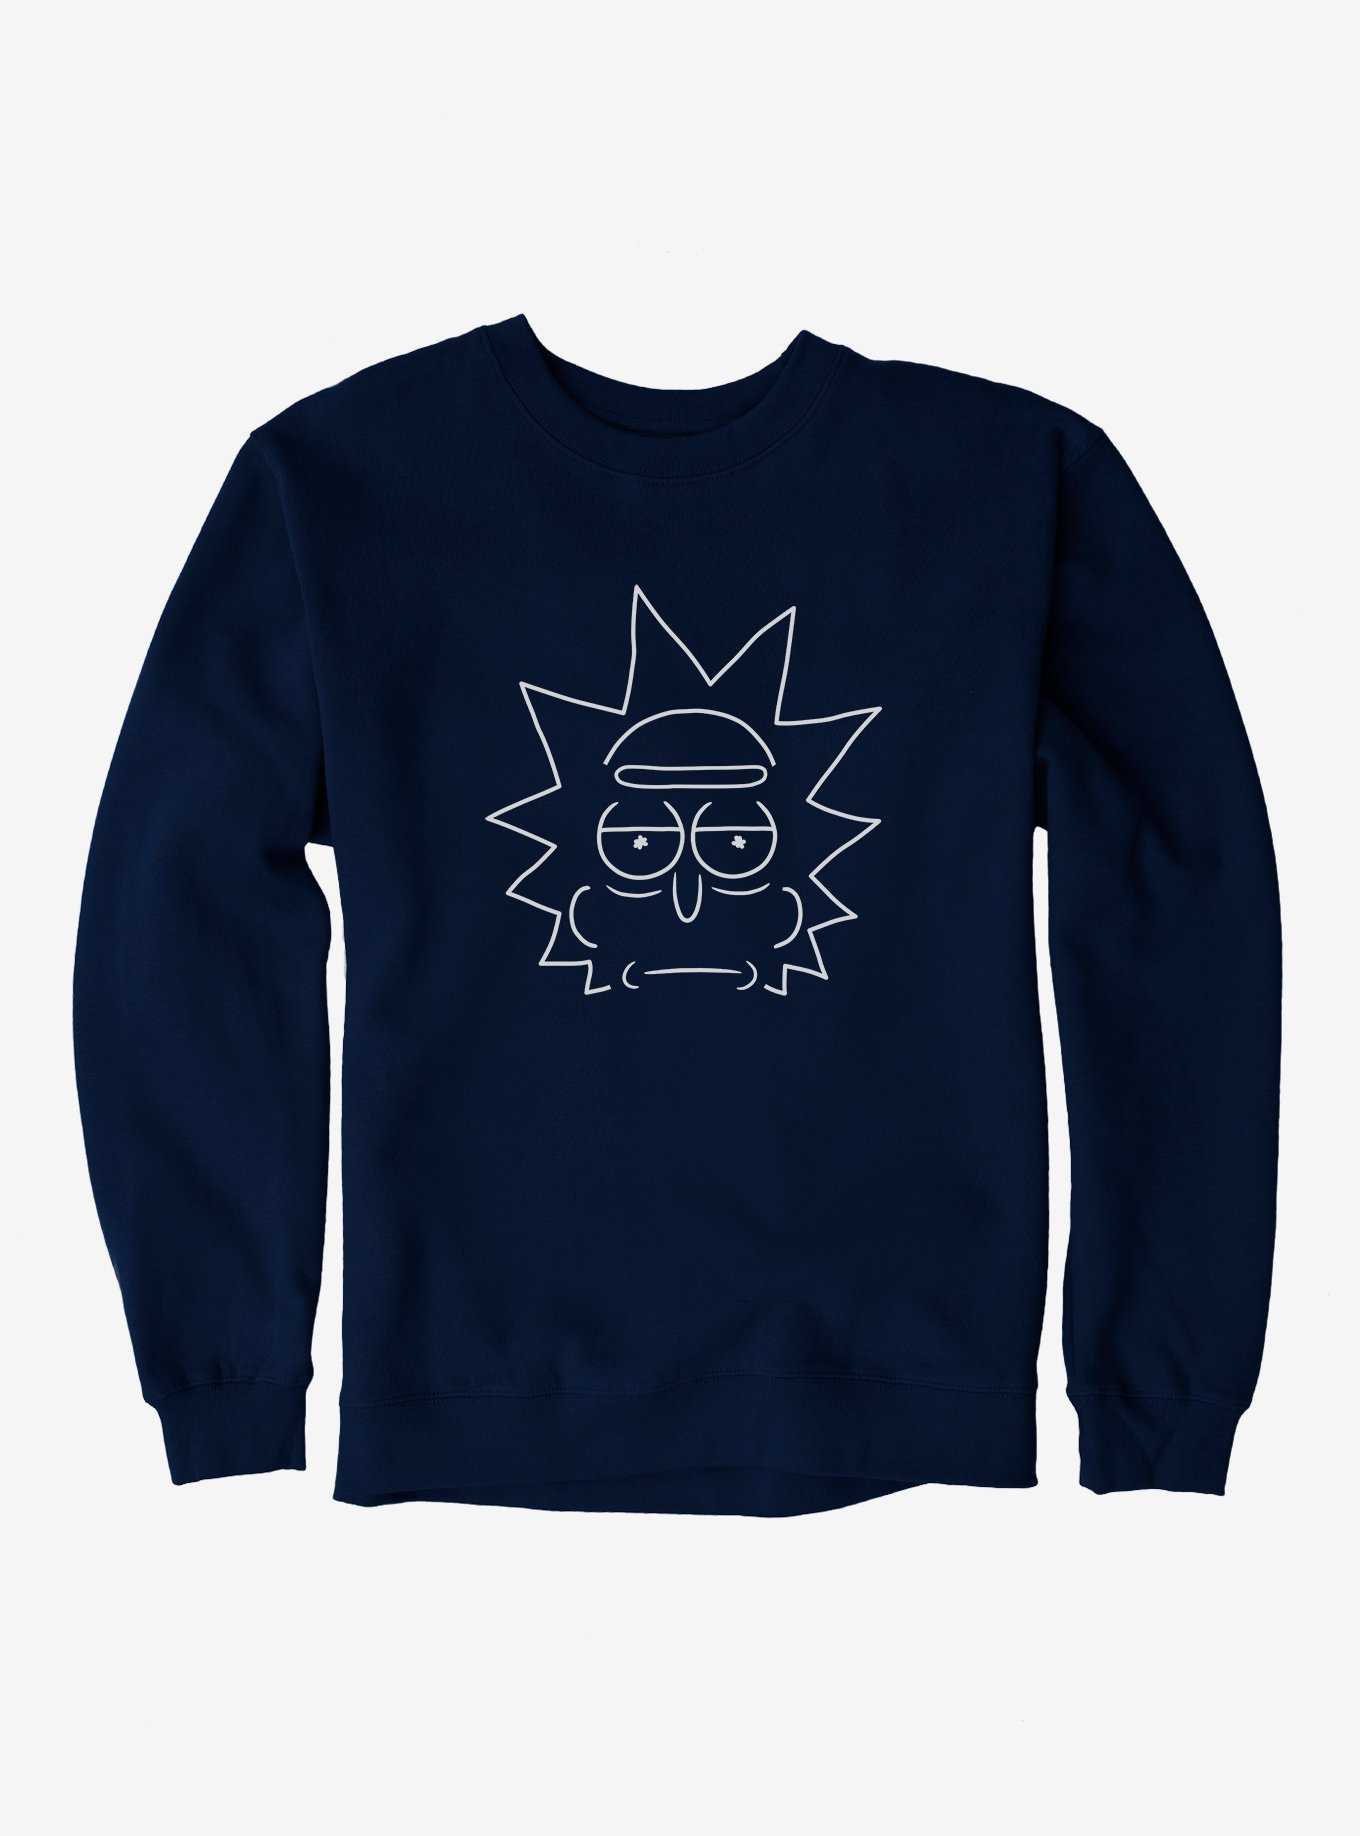 Rick And Morty Rick Outlined Sweatshirt, , hi-res